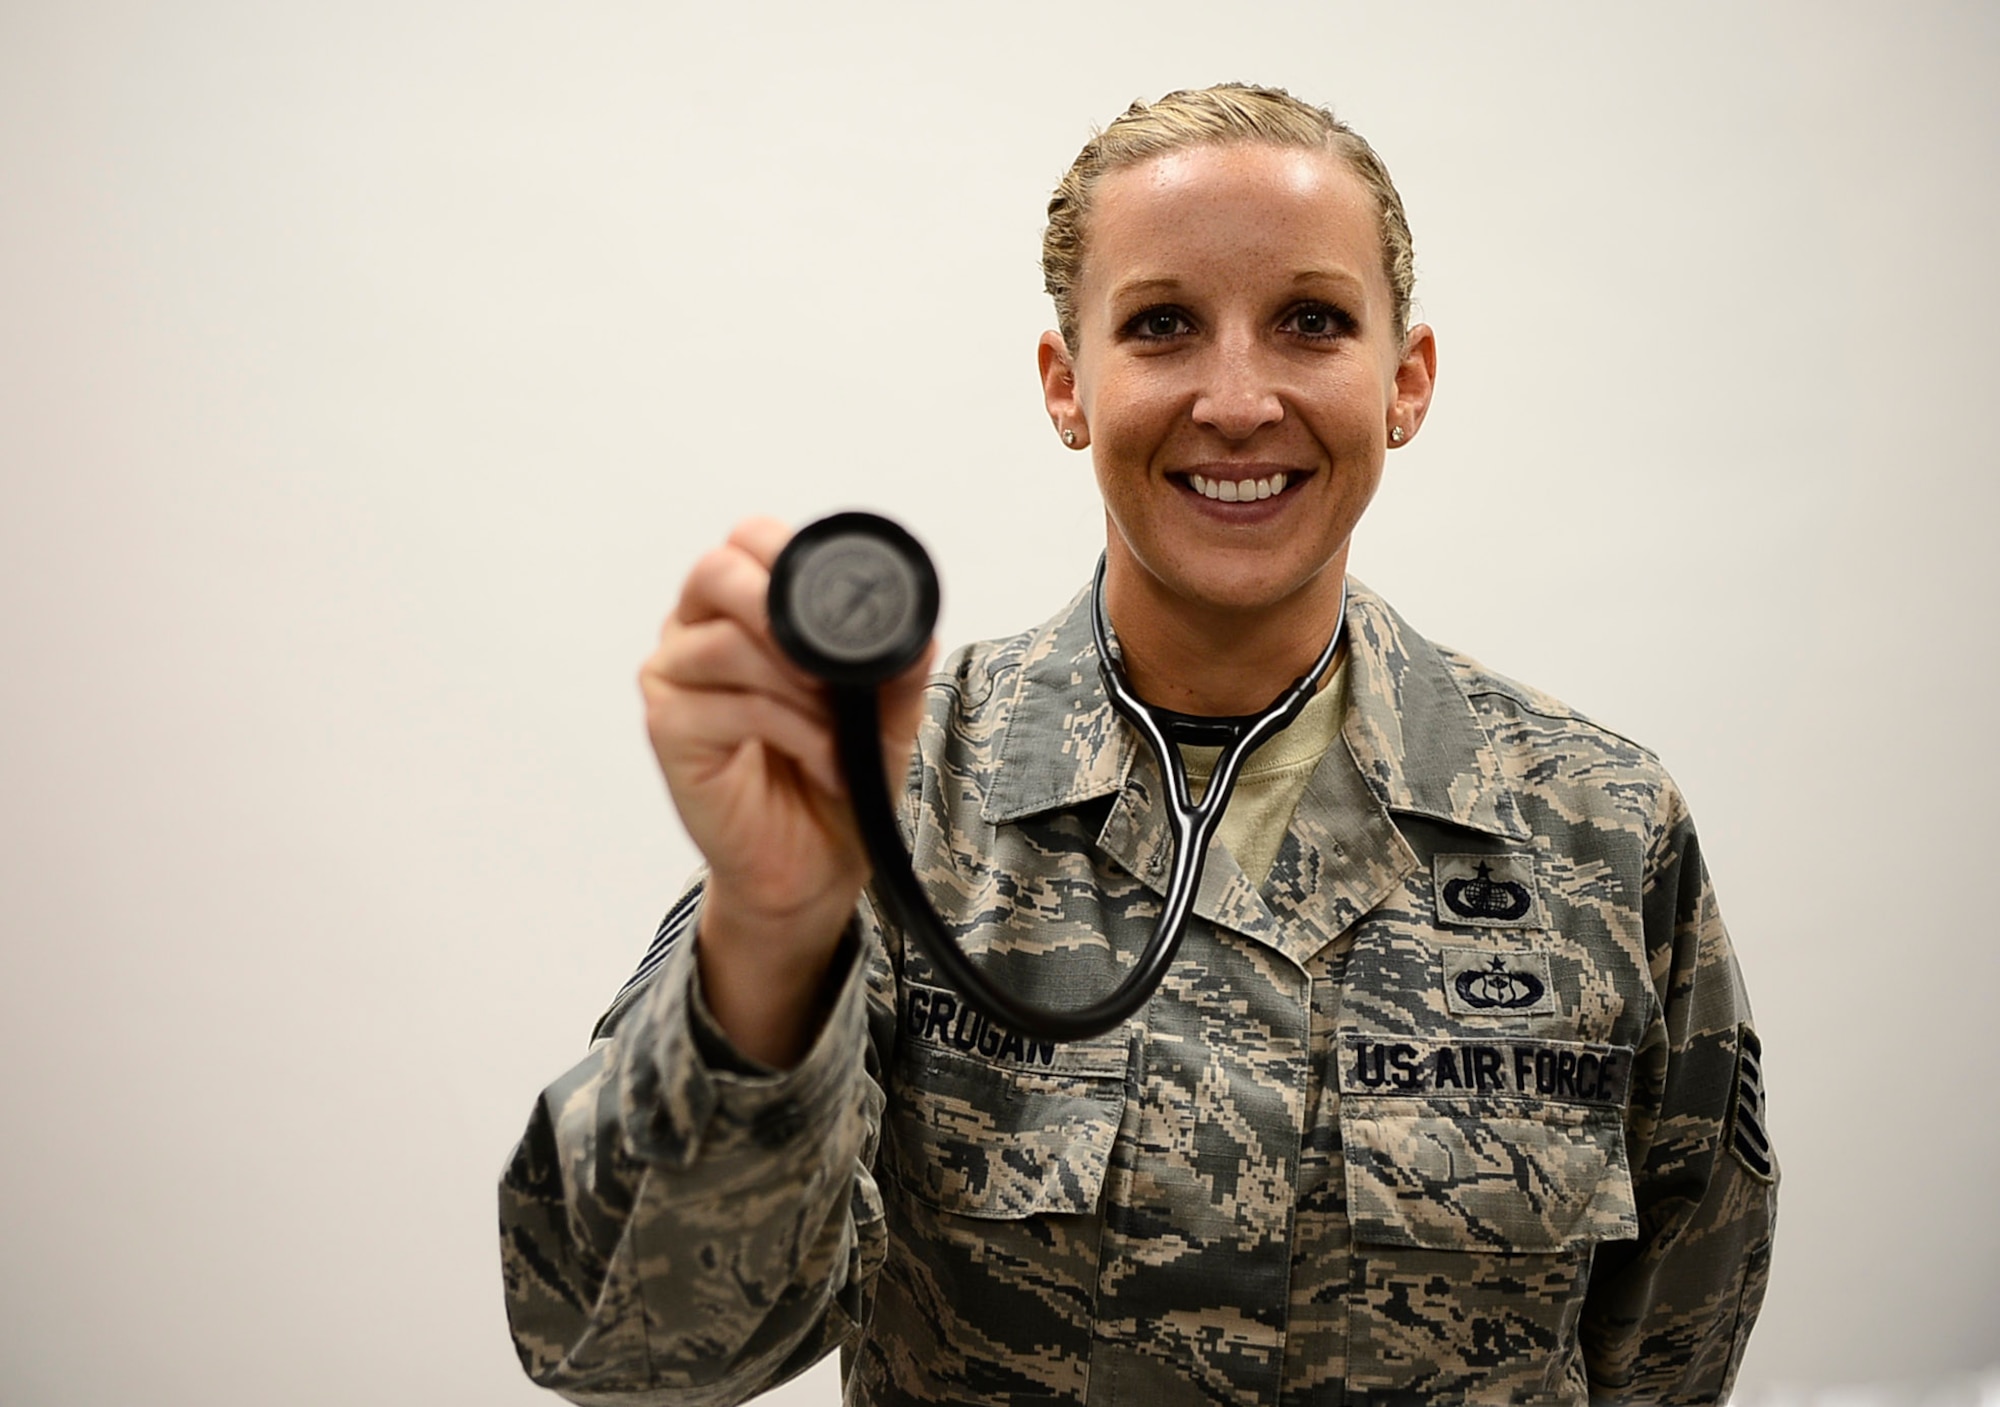 Tech. Sgt. Jessica Grogan, contracting officer and team lead with the 6th Contracting Squadron, pauses for a photo at MacDill Air Force Base, Fla., Sept. 22, 2016. Grogan was notified April 8, 2016 that she was accepted into the Interservice Physician Assistant Program through the Air Force. (U.S. Air Force photo by Senior Airman Tori Schultz)